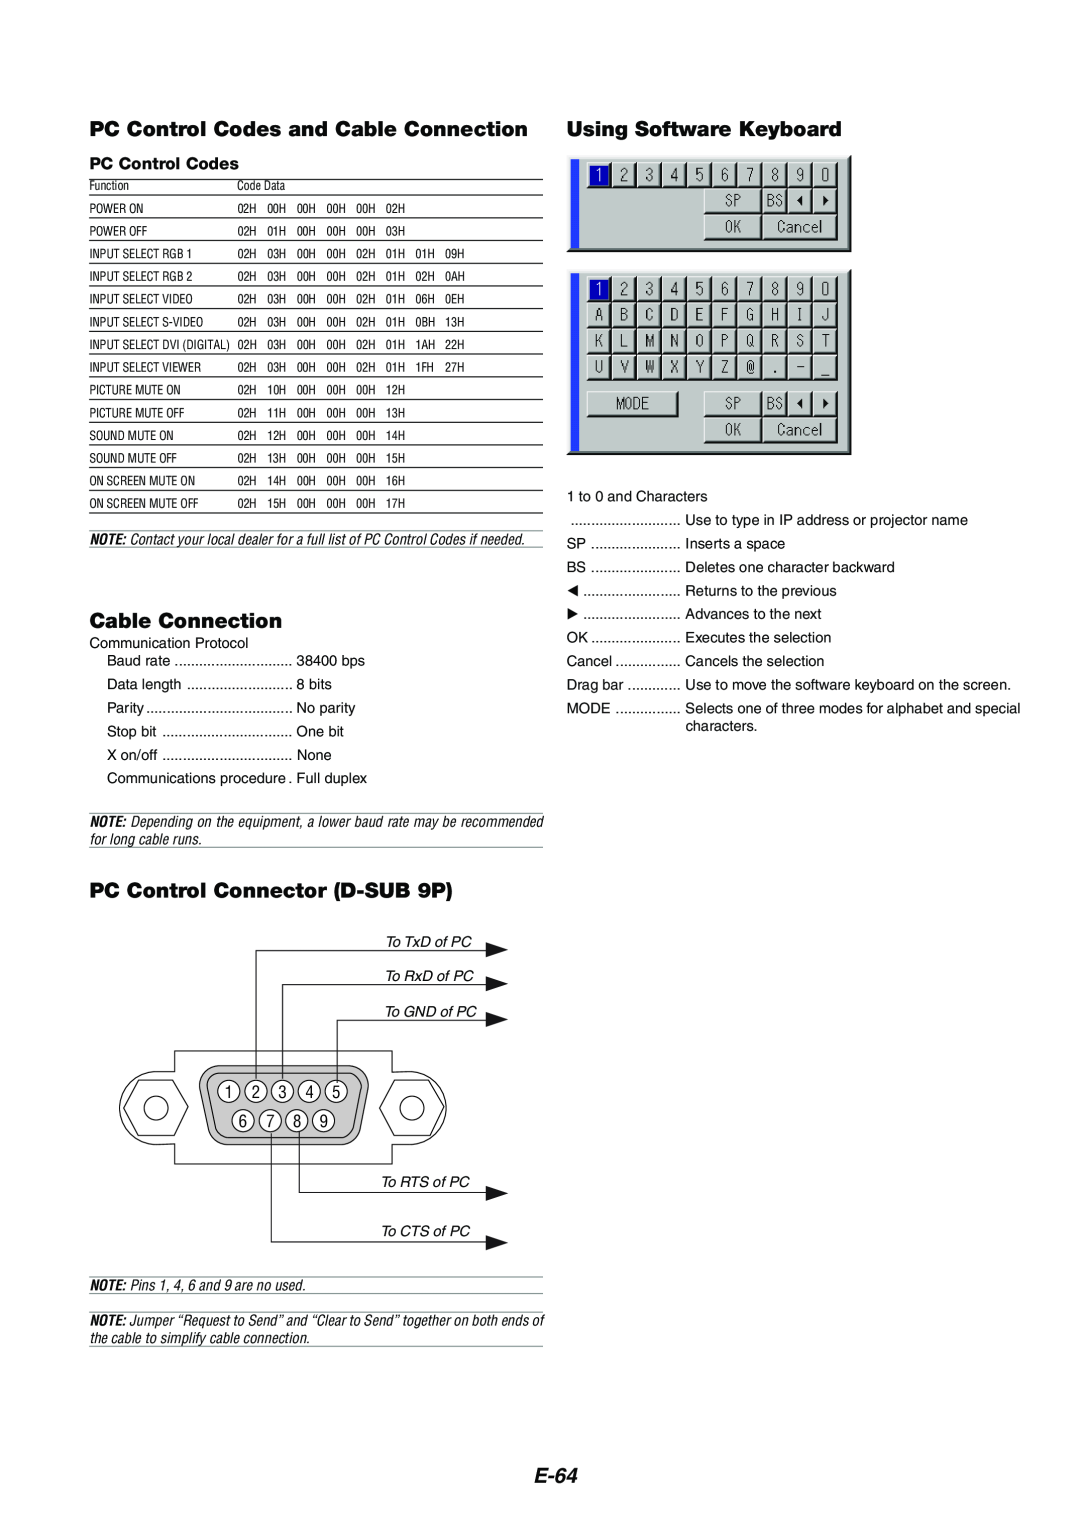 NEC MT1075/MT1065 PC Control Codes and Cable Connection, PC Control Connector D-SUB9P, Using Software Keyboard, E-64 